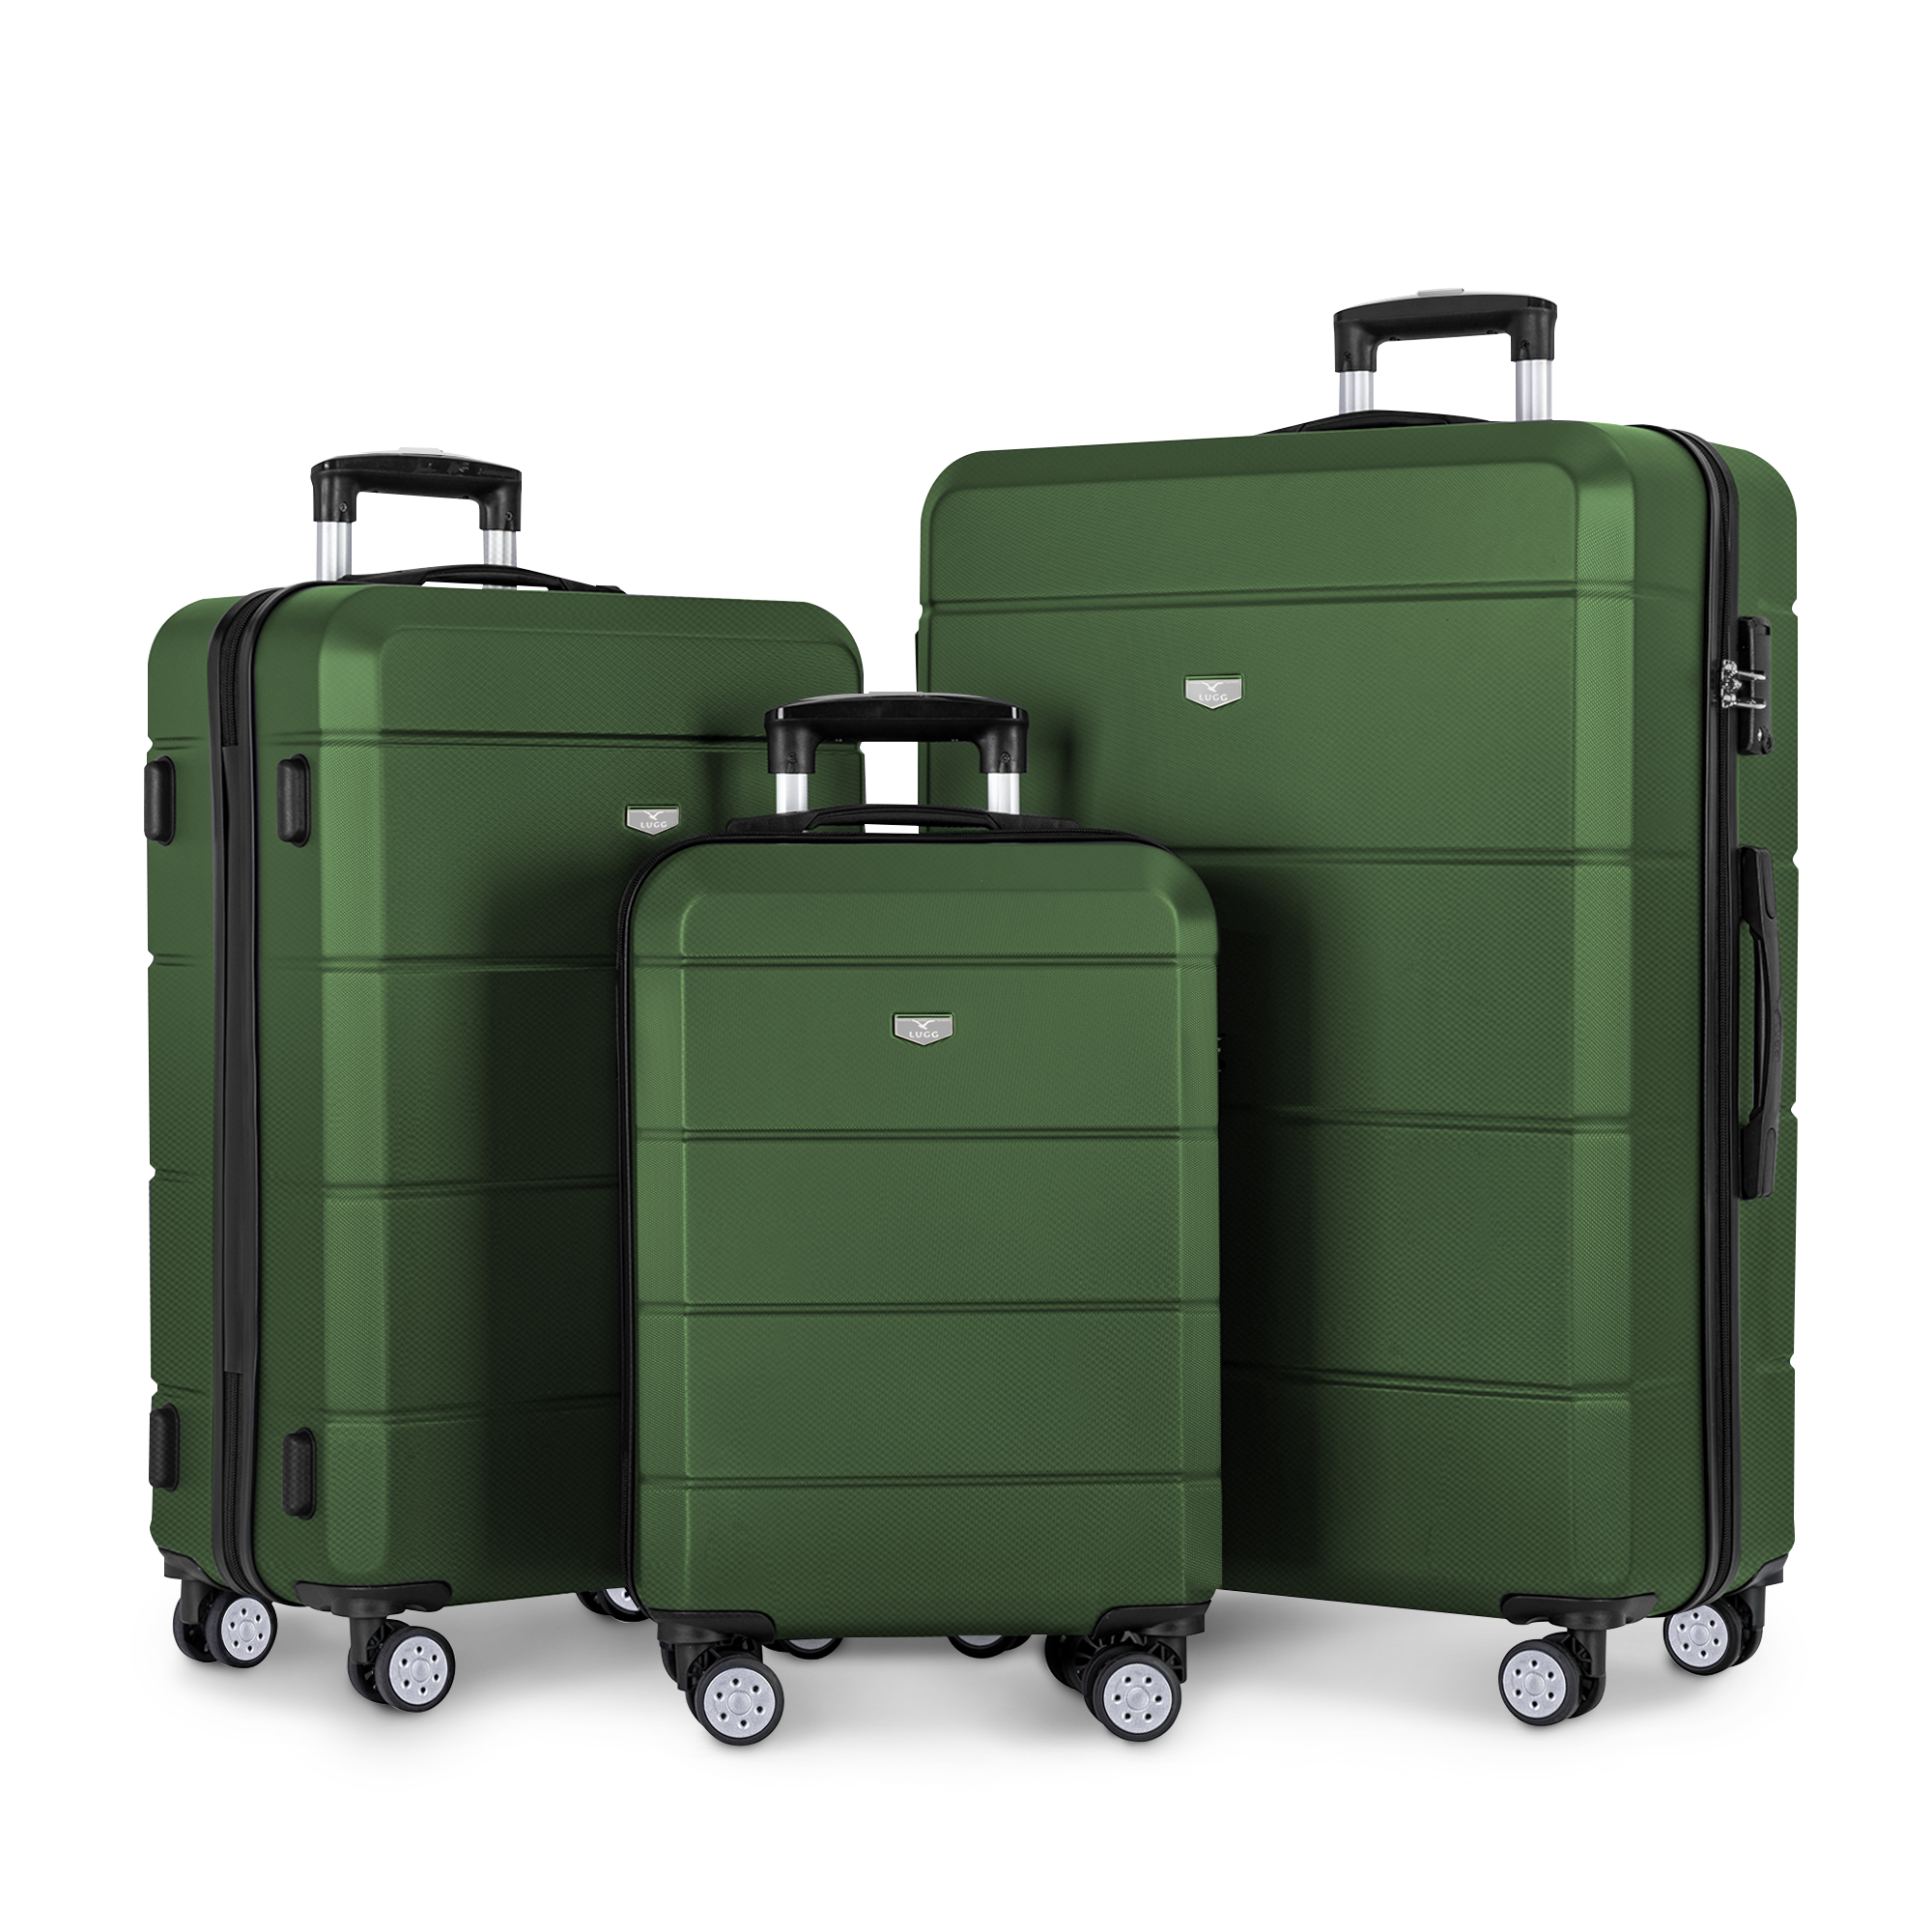 Jetset 3pc Suitcase Set in Army Green